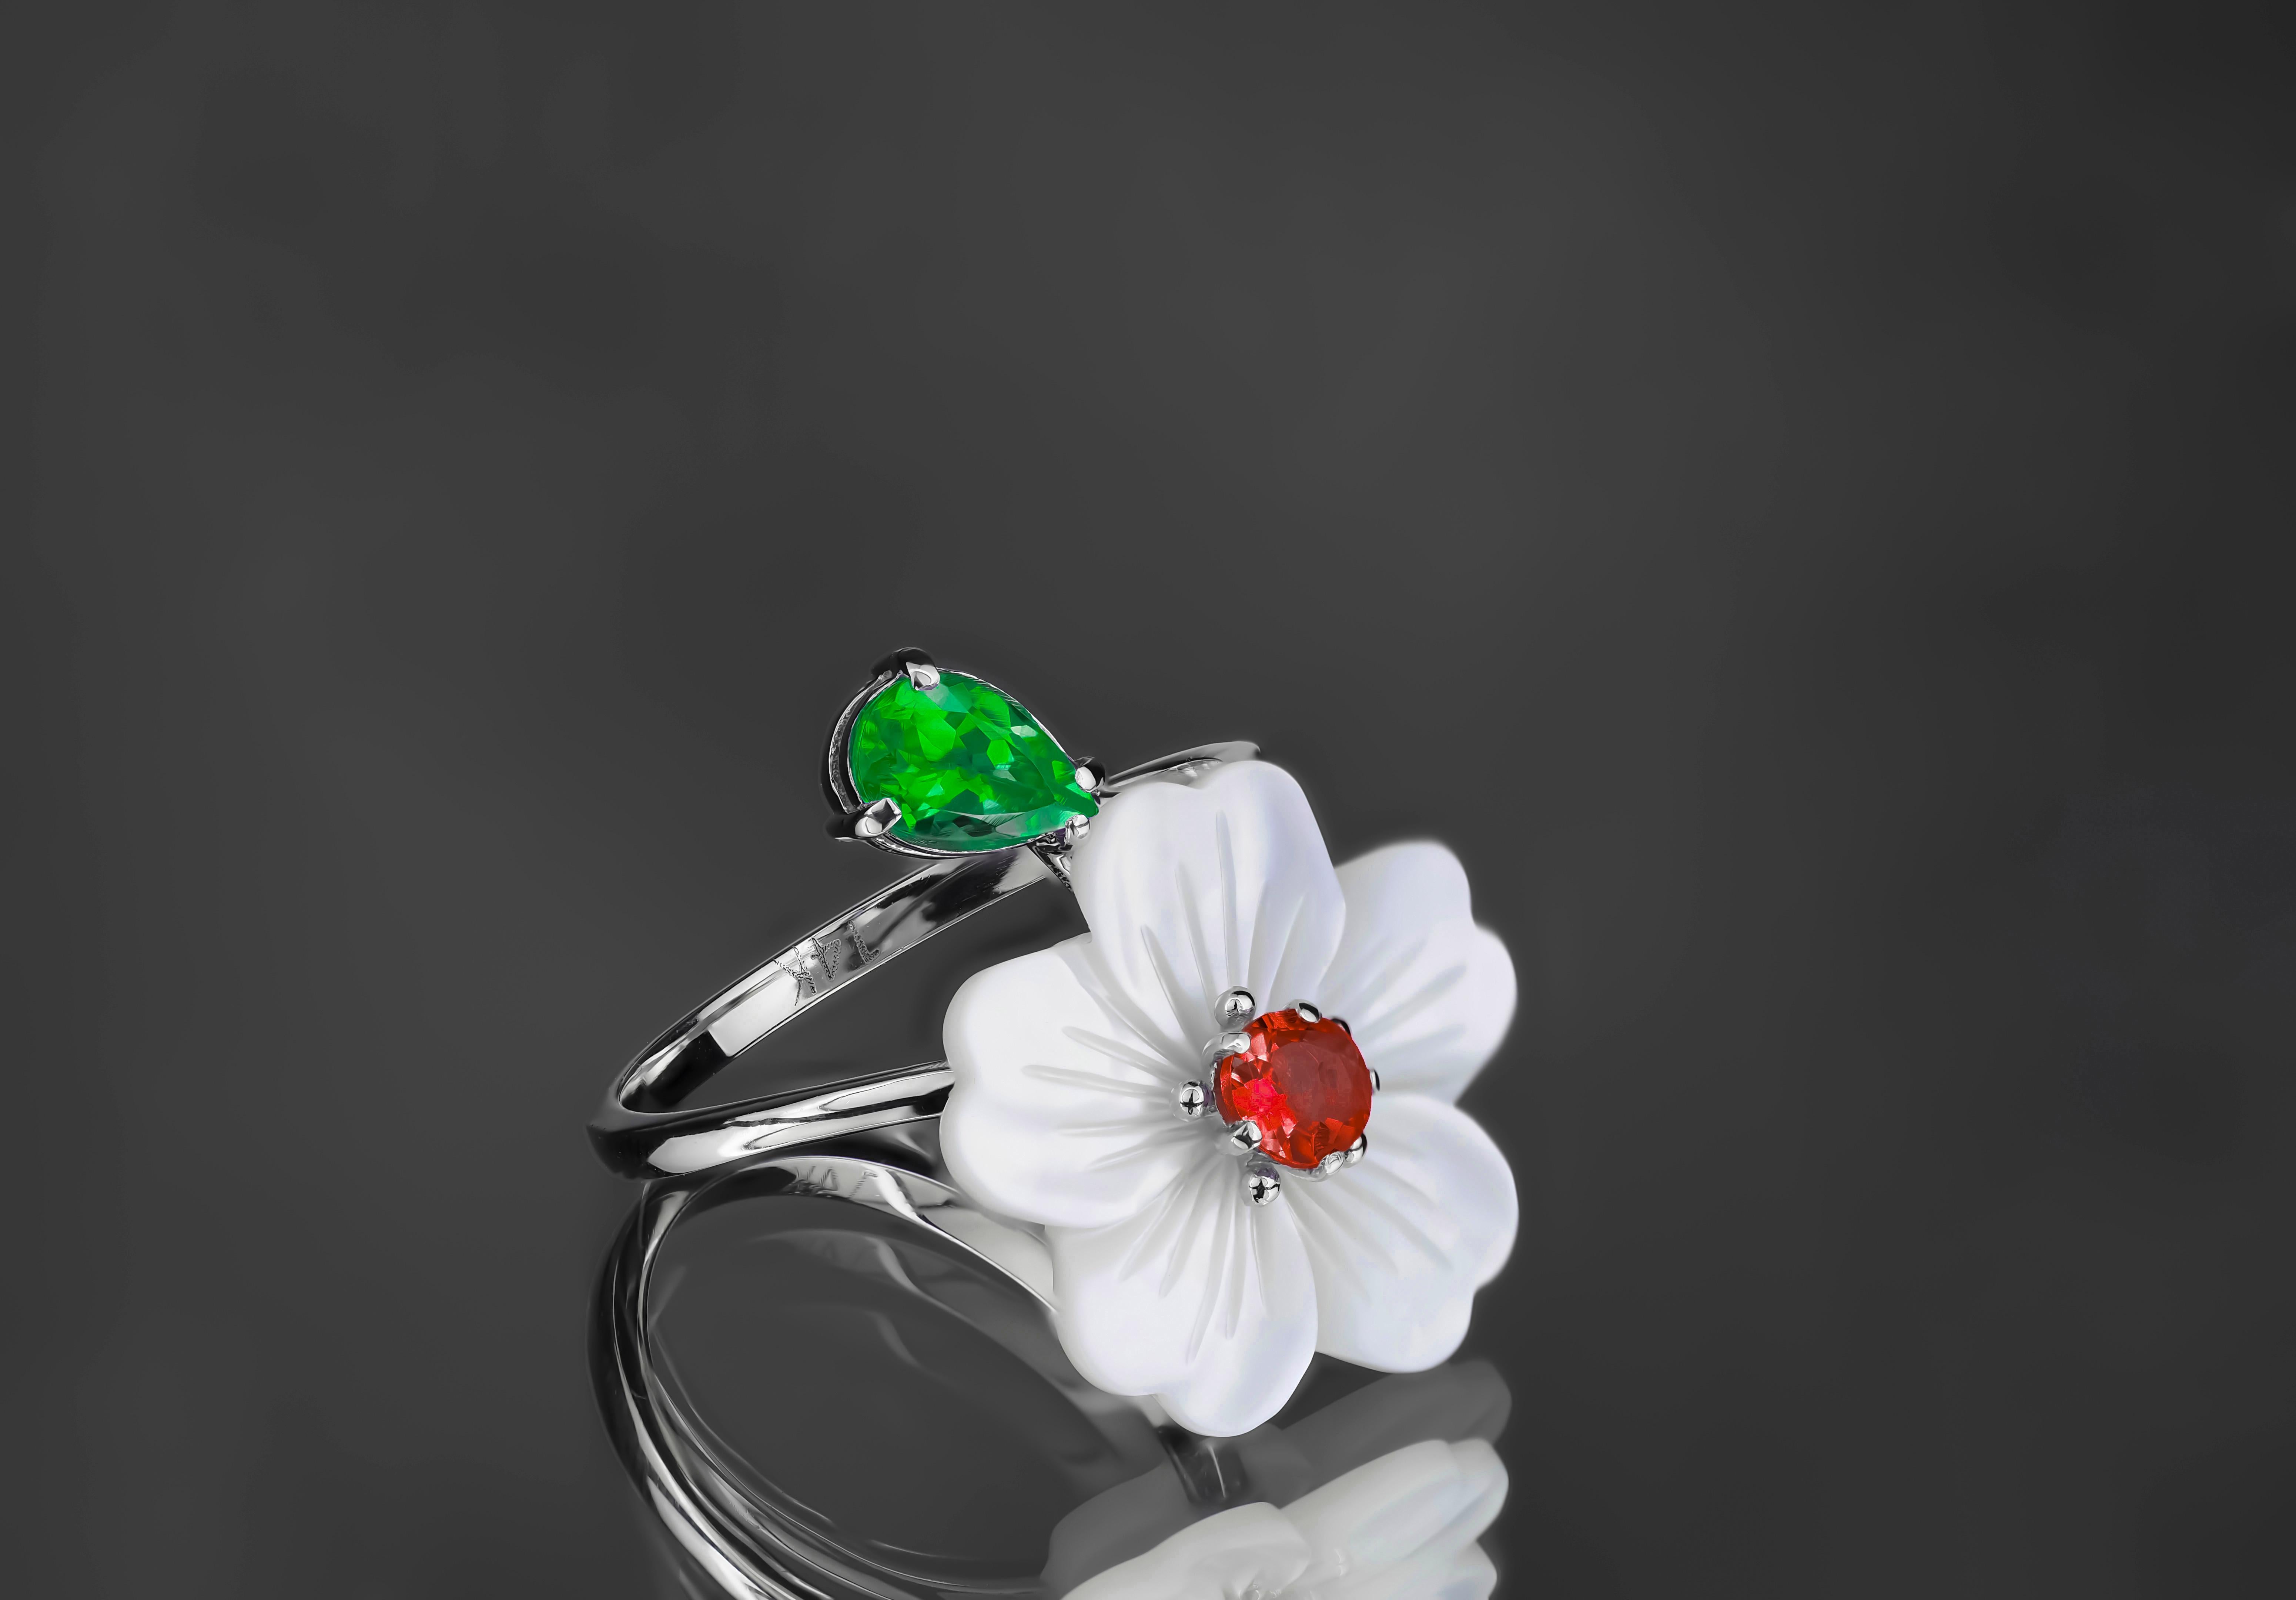 Carved Flower 14k ring with gemstones.
Lab emerald and ruby ring in 14k gold. Carved mother of pearl flower ring. Flower gold ring. Emerald vintage ring. Nature inspired ring with mother of pearl flower. Shell flower ring.

Metal: 14k solid